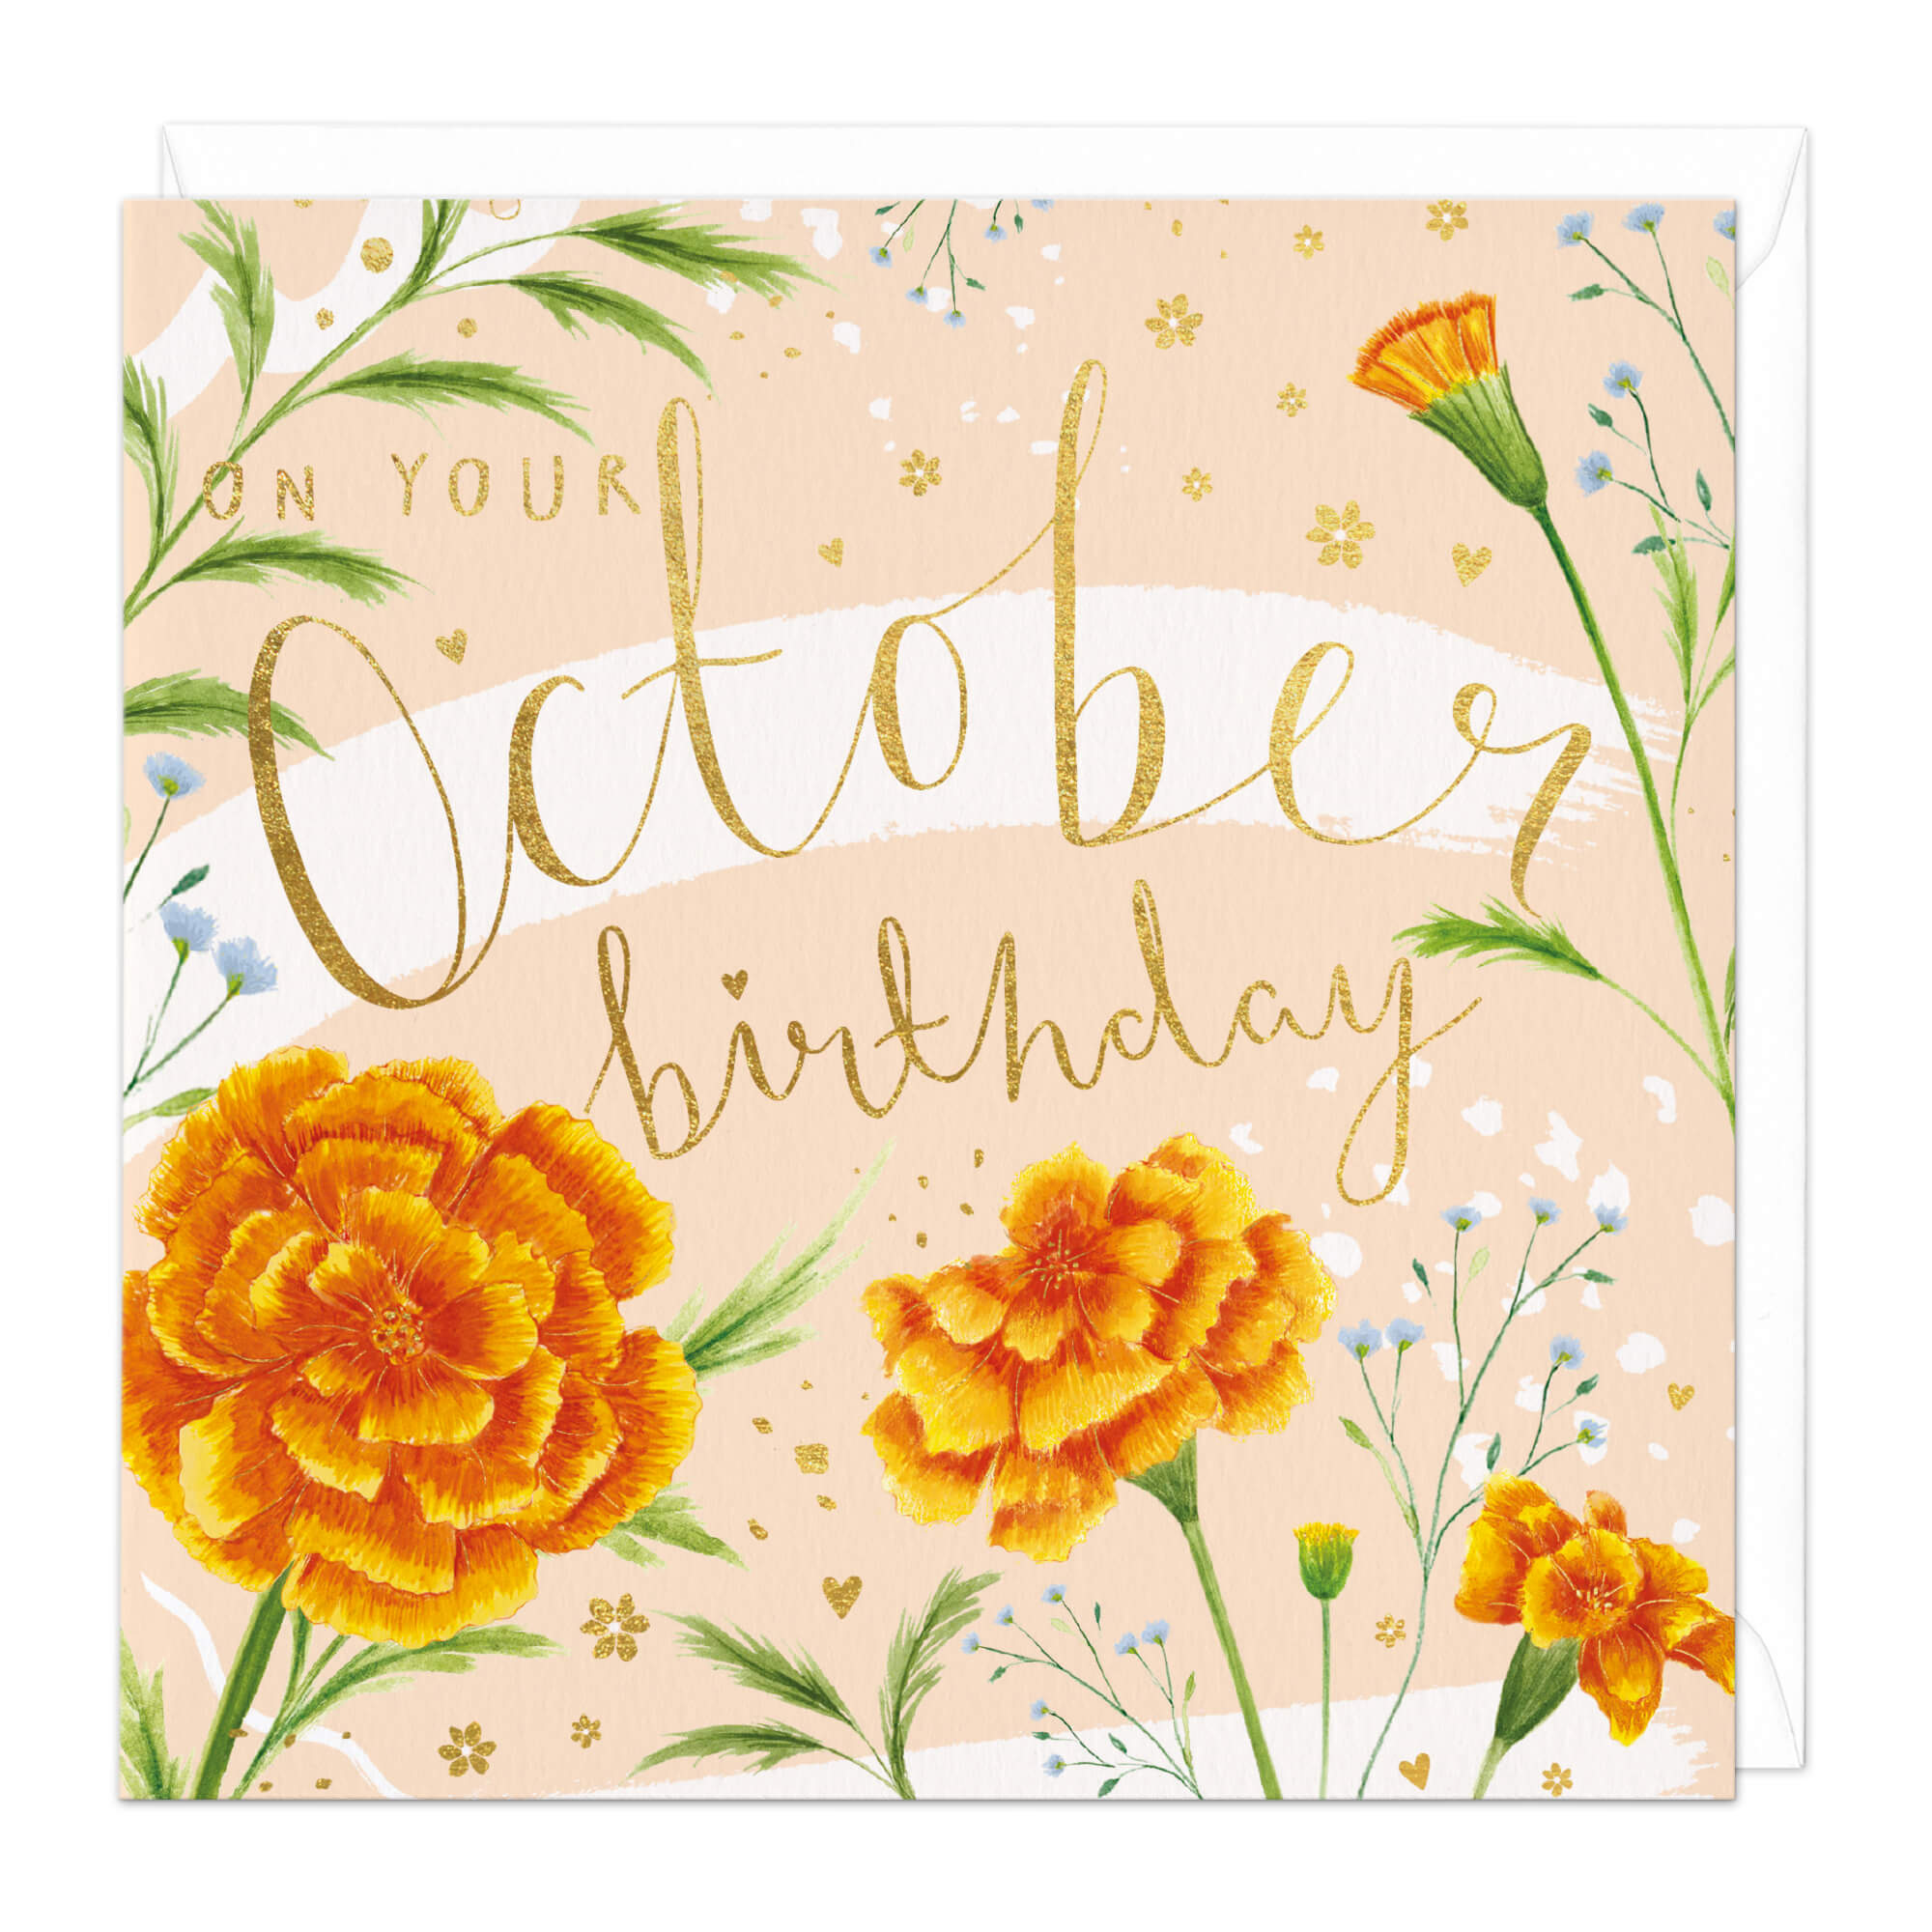 On Your October Birthday Card